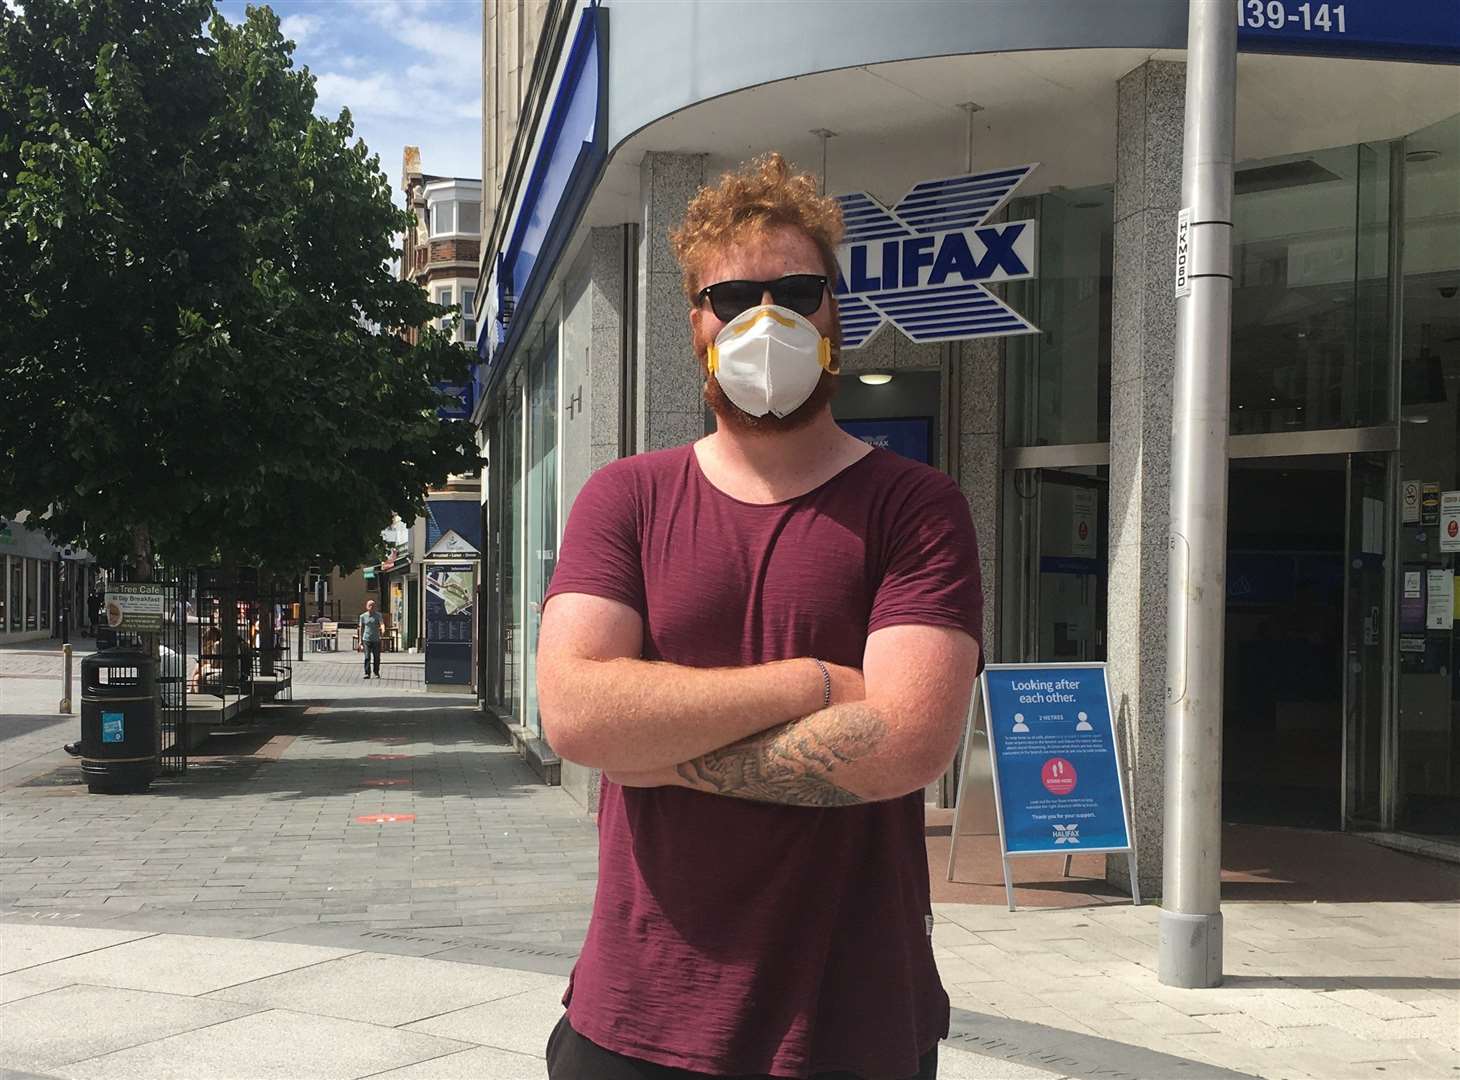 Chris Columb, 25, says people should be wearing masks in shops as it's better to be cautious